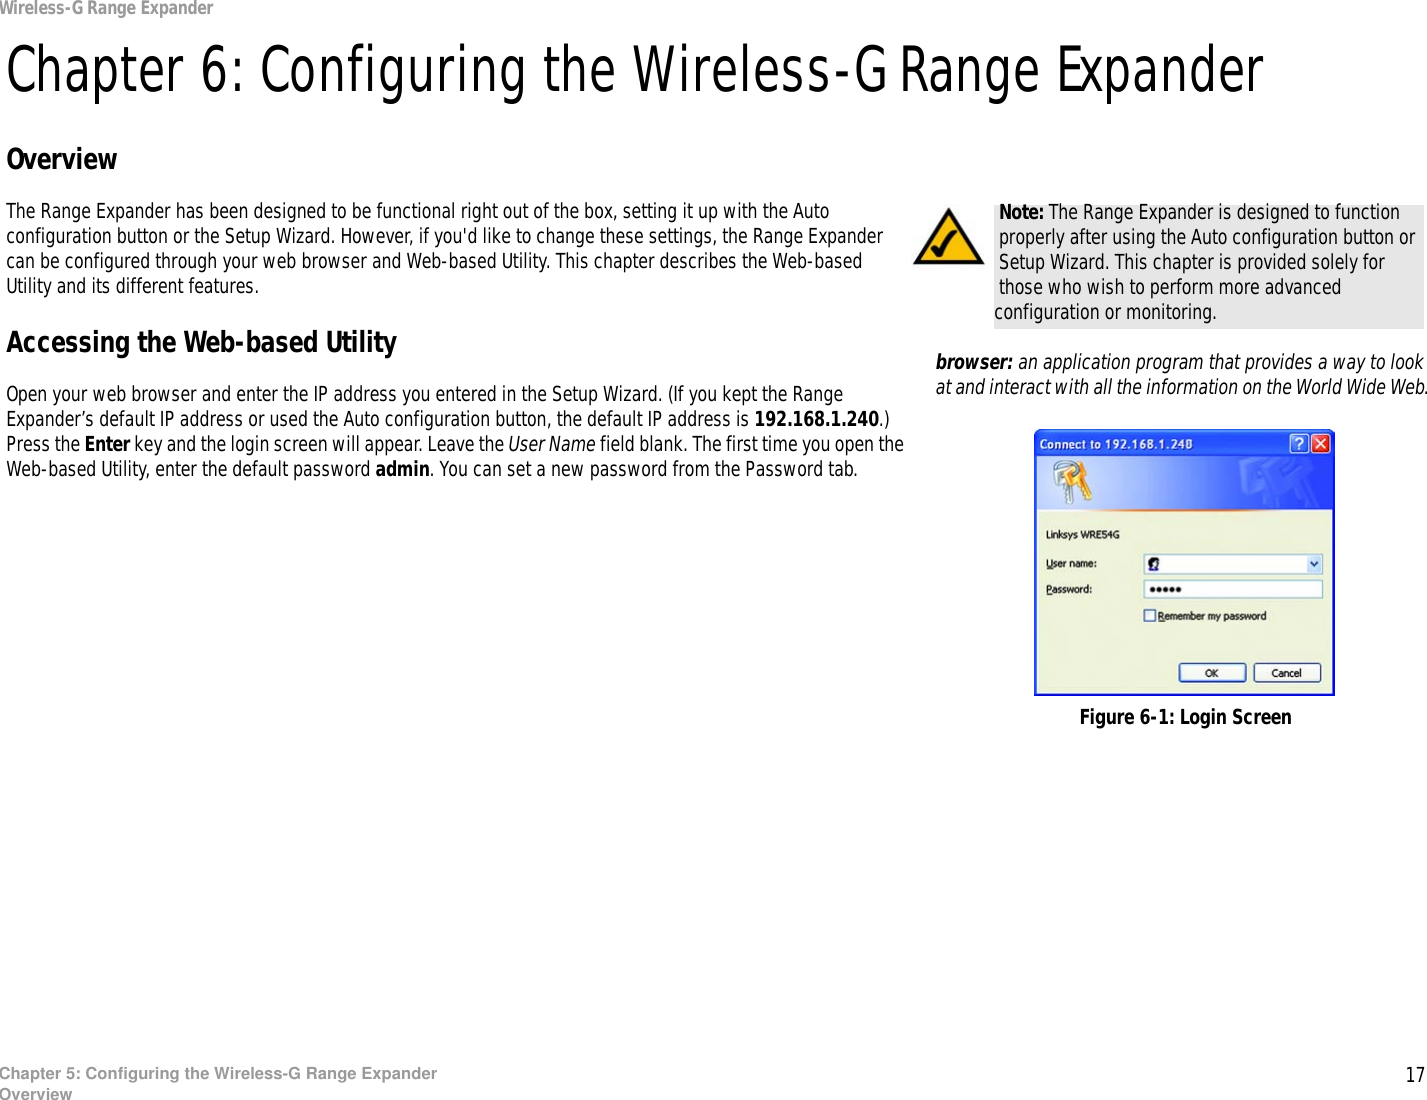 17Chapter 5: Configuring the Wireless-G Range ExpanderOverviewWireless-G Range ExpanderChapter 6: Configuring the Wireless-G Range ExpanderOverviewThe Range Expander has been designed to be functional right out of the box, setting it up with the Auto configuration button or the Setup Wizard. However, if you&apos;d like to change these settings, the Range Expander can be configured through your web browser and Web-based Utility. This chapter describes the Web-based Utility and its different features.Accessing the Web-based UtilityOpen your web browser and enter the IP address you entered in the Setup Wizard. (If you kept the Range Expander’s default IP address or used the Auto configuration button, the default IP address is 192.168.1.240.) Press the Enter key and the login screen will appear. Leave the User Name field blank. The first time you open the Web-based Utility, enter the default password admin. You can set a new password from the Password tab.Note: The Range Expander is designed to function properly after using the Auto configuration button or Setup Wizard. This chapter is provided solely for those who wish to perform more advanced configuration or monitoring.Figure 6-1: Login Screenbrowser: an application program that provides a way to look at and interact with all the information on the World Wide Web. 